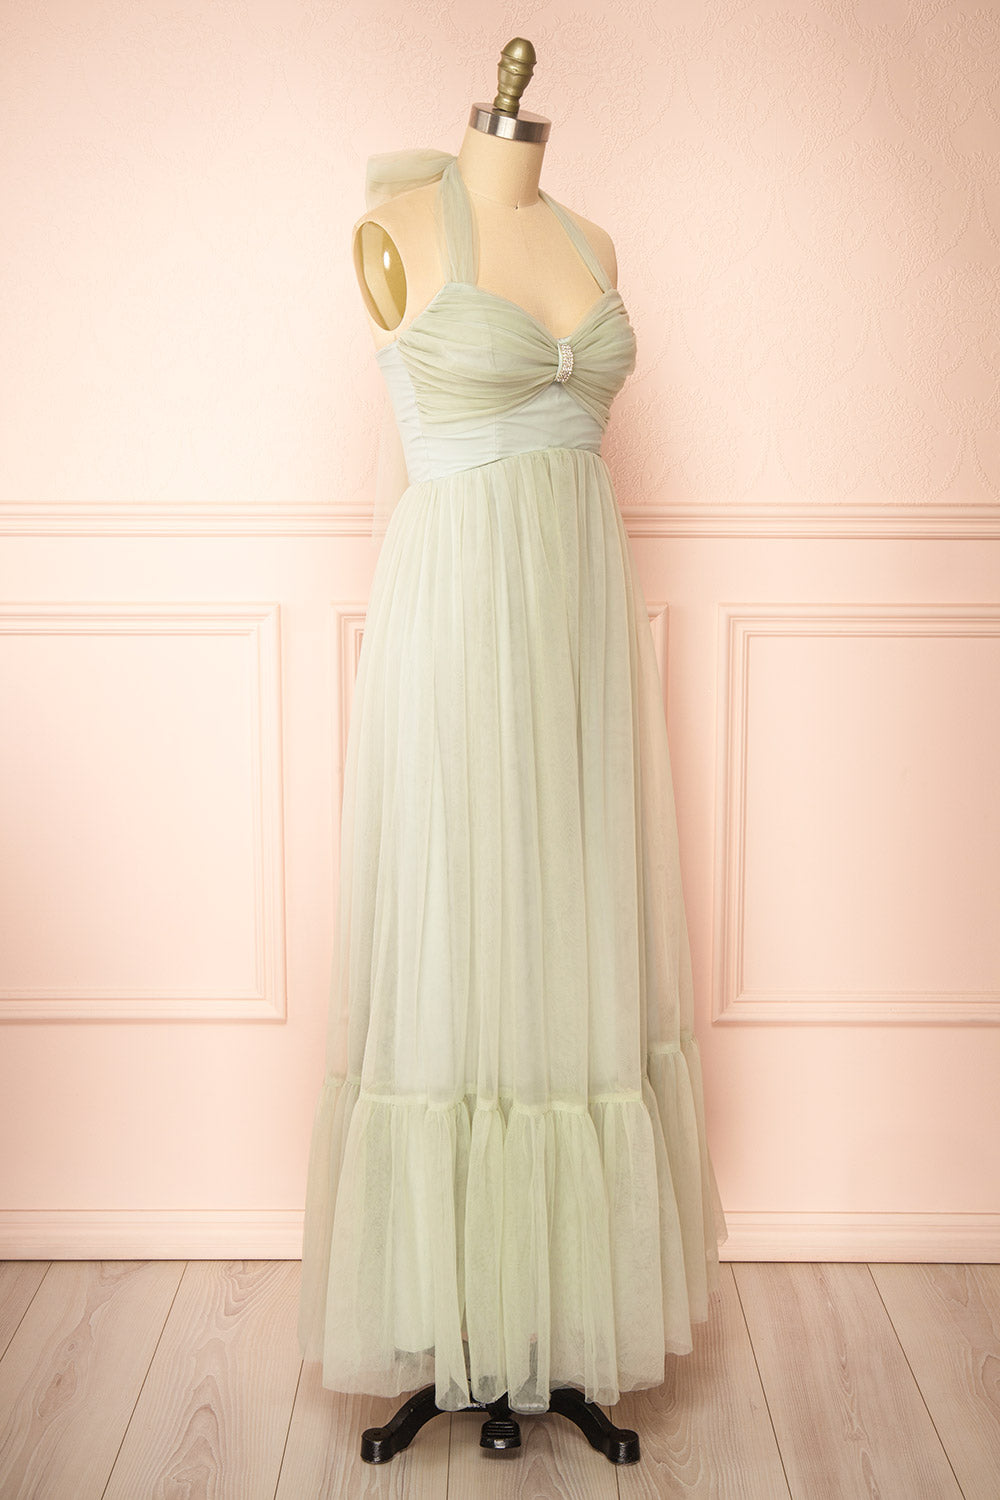 Emberly Sage Tulle Dress w/ Halter Neck | Boutique 1861 side view